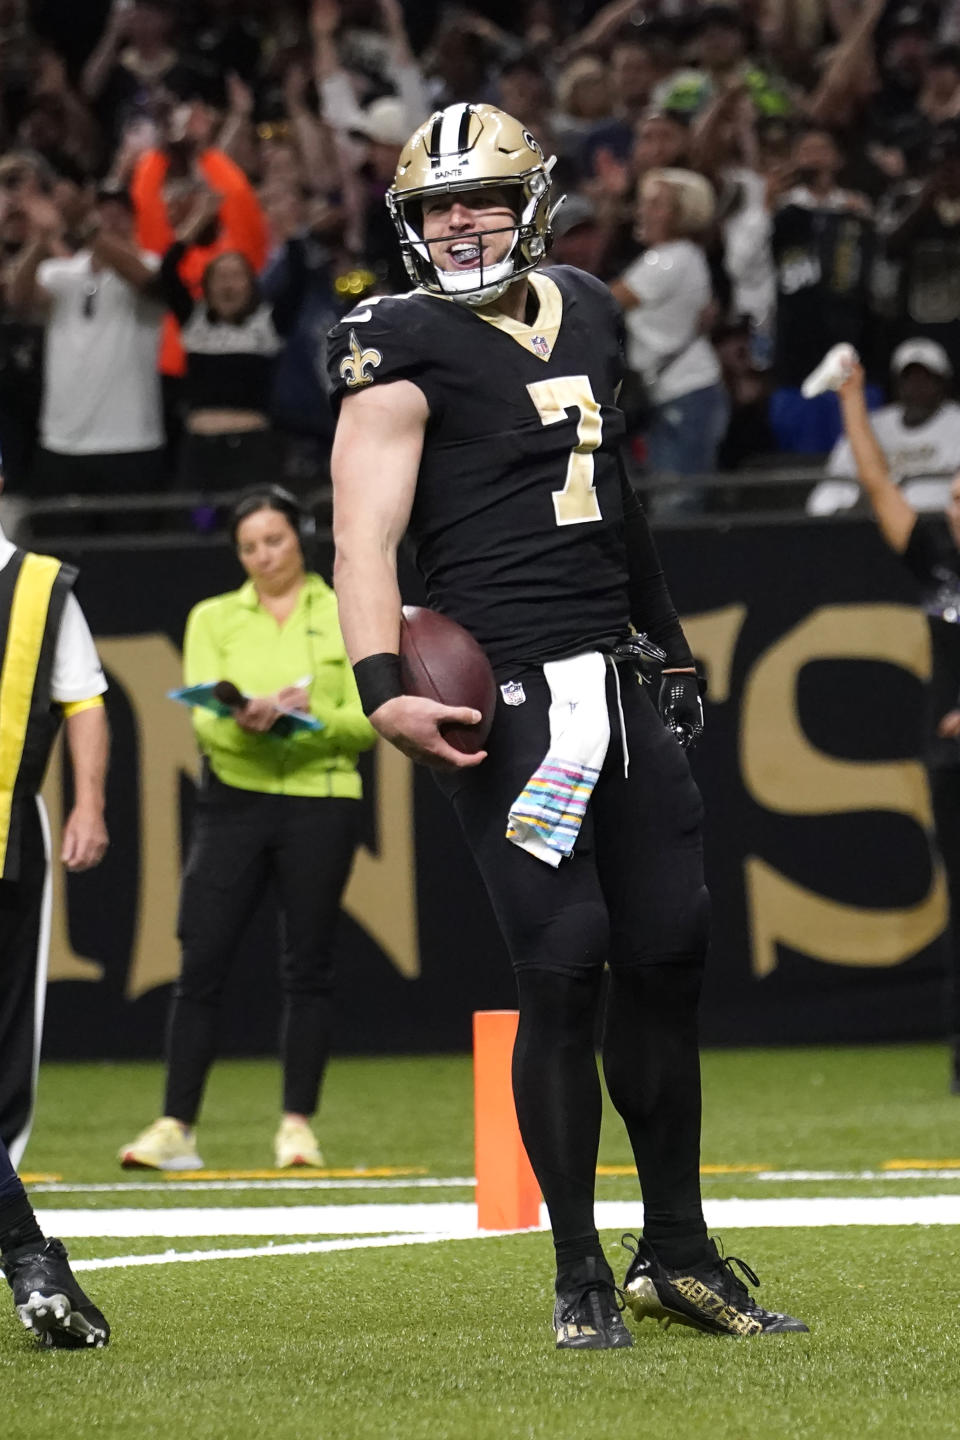 New Orleans Saints' Taysom Hill celebrates his second touch of an NFL football game against the Seattle Seahawks in New Orleans, Sunday, Oct. 9, 2022. (AP Photo/Gerald Herbert)